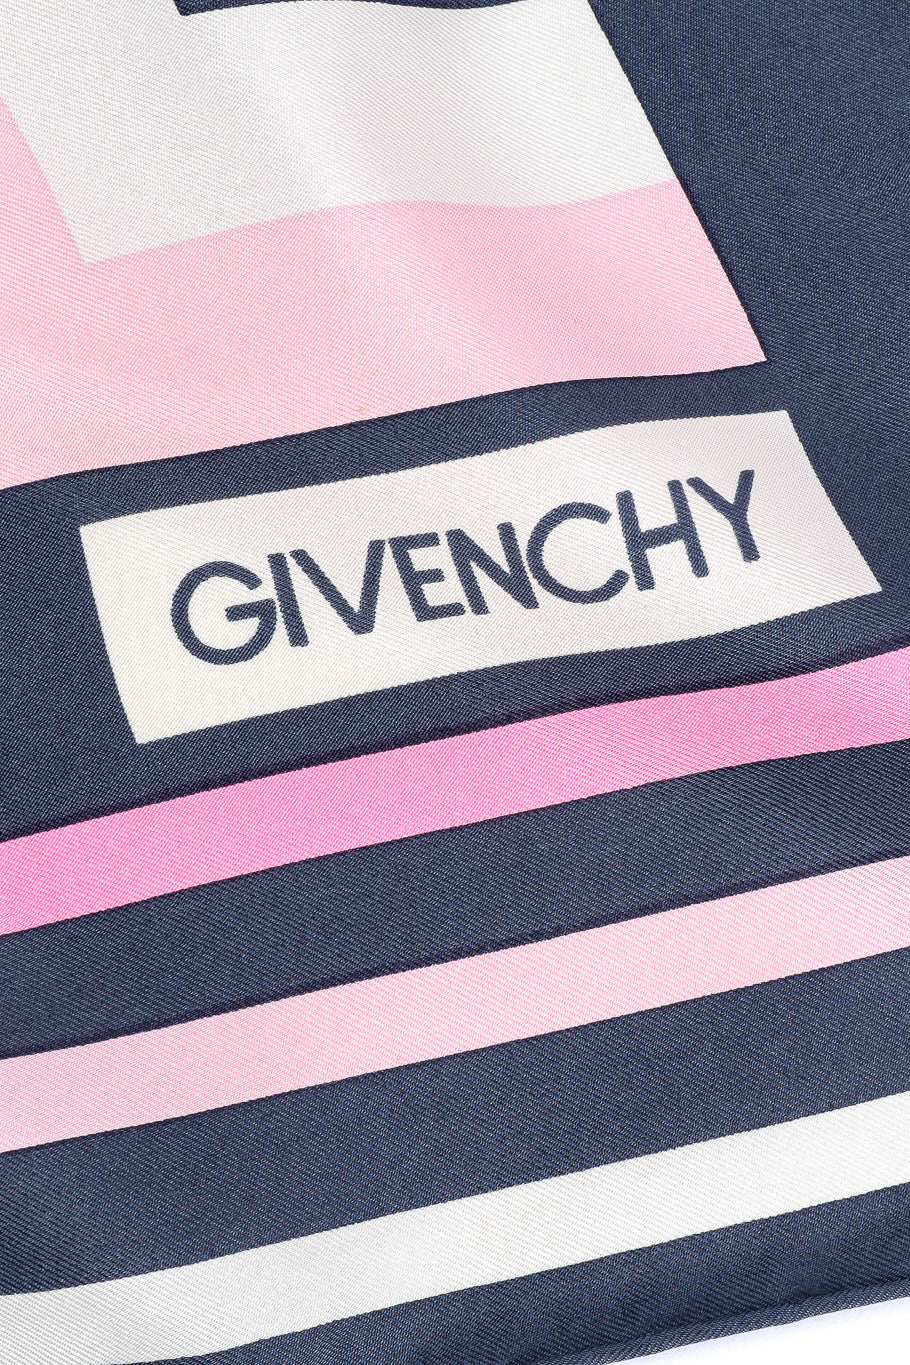 Square shapes print scarf by Givenchy Photo of Designer label. @recessla